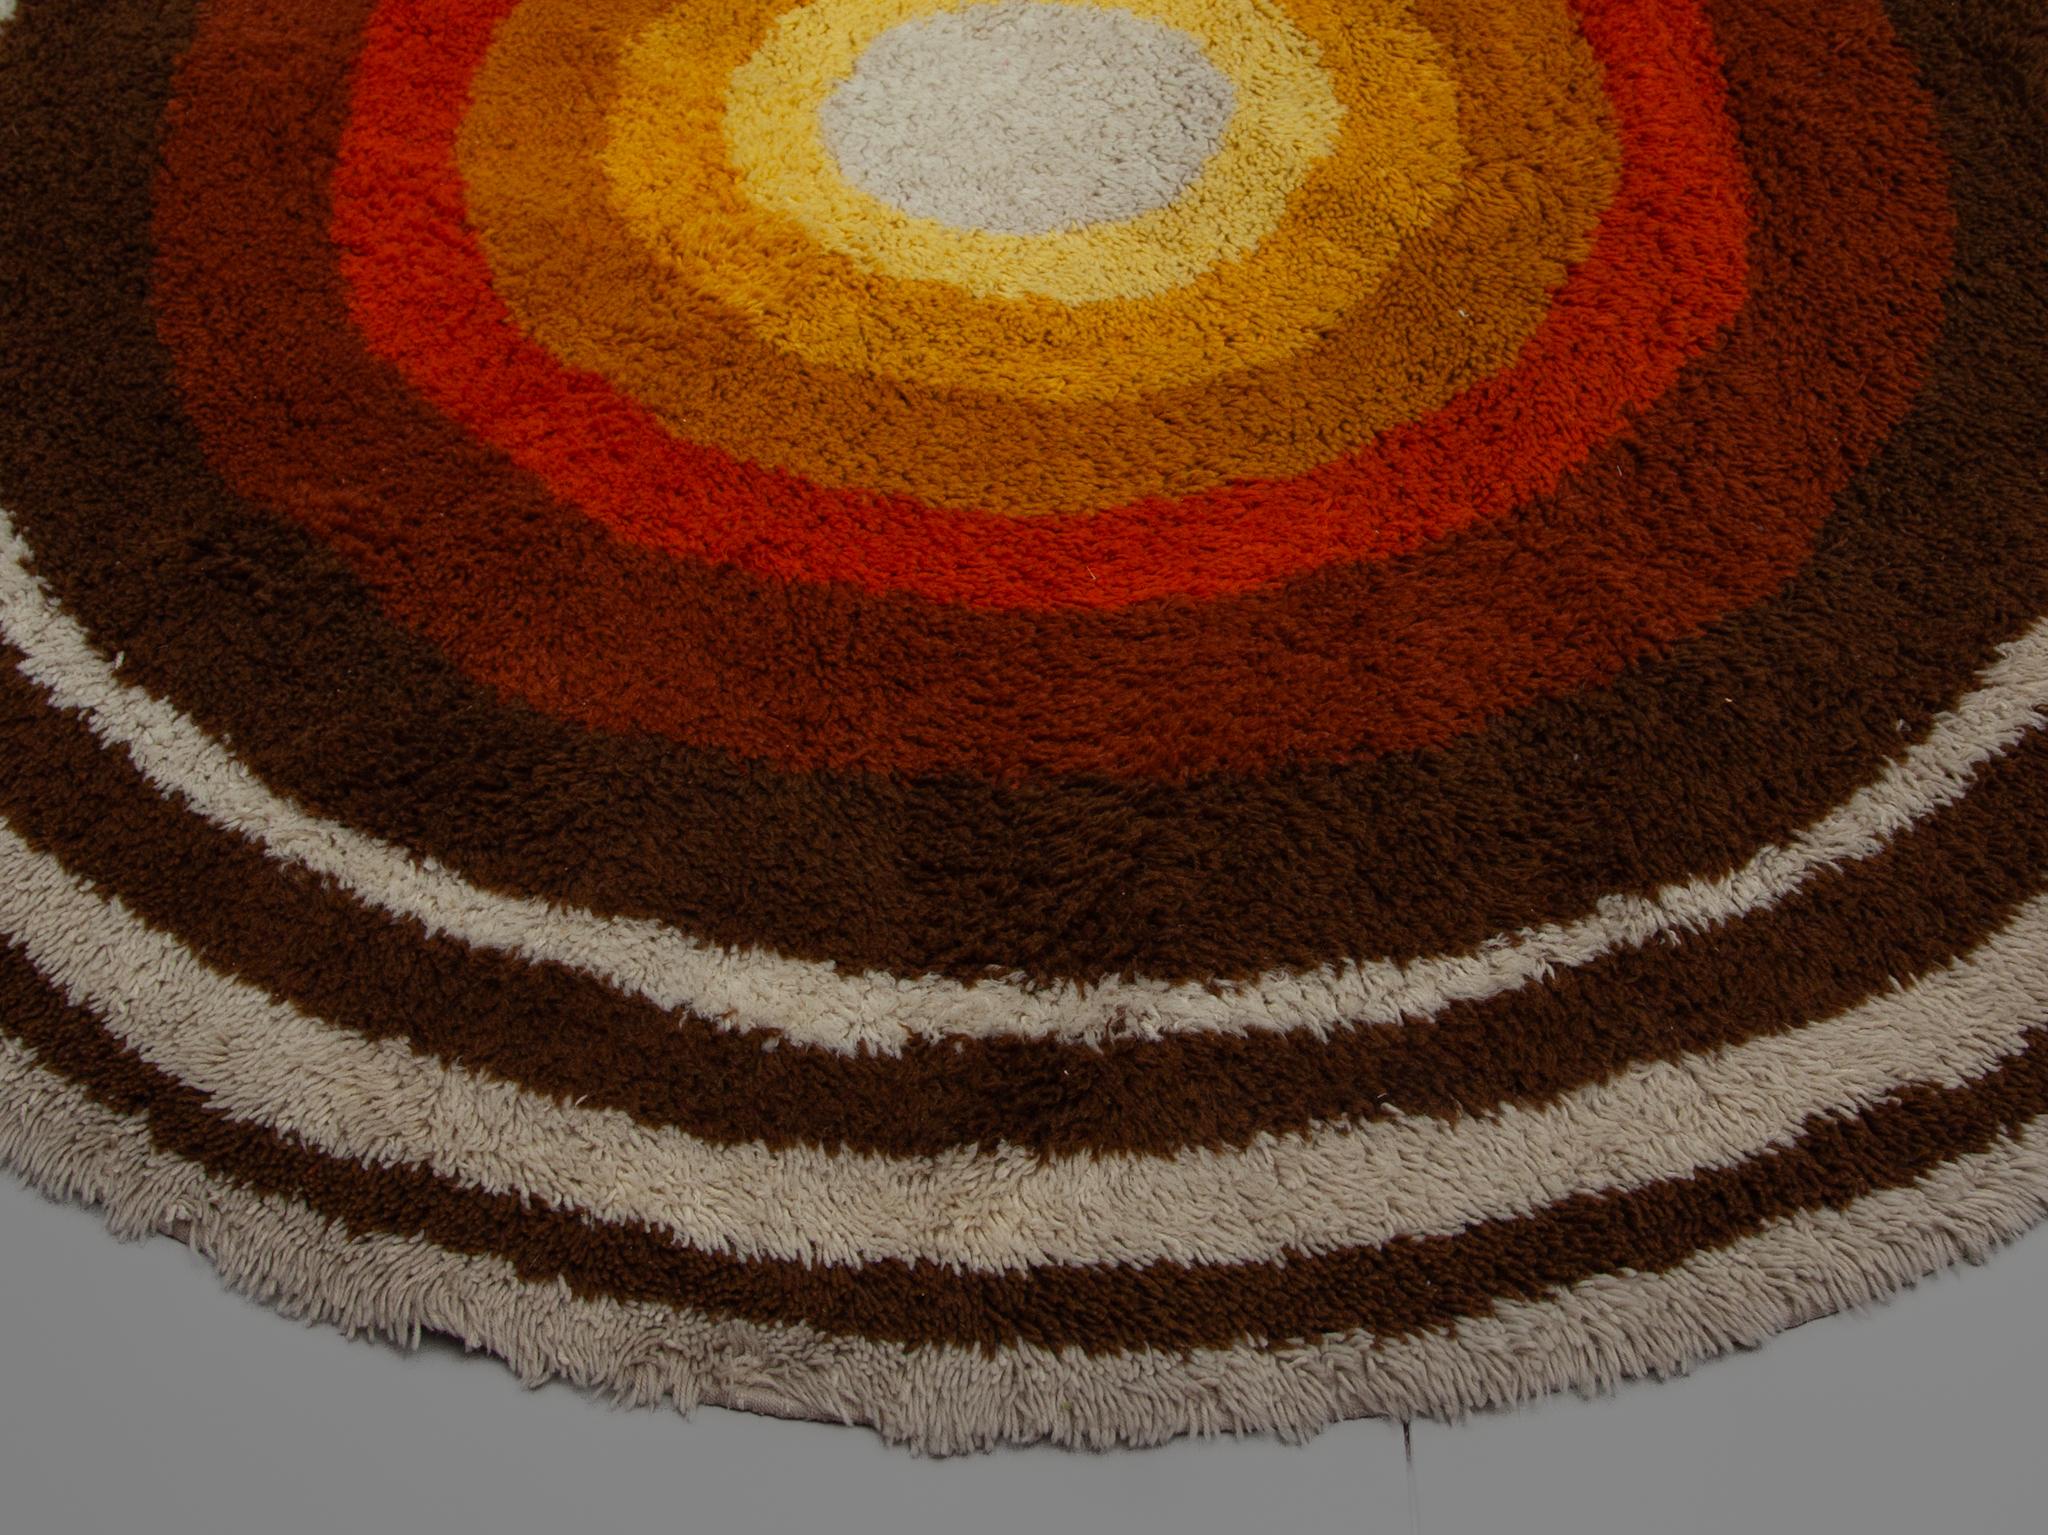 1960s Modernist round carpet by Desso, designed in the Netherlands, Pop art period. It is made from polyacryl wool and it is still in a very good vintage condition. Beautiful bright colors in several brown, orange and yellow tones. 

An interesting